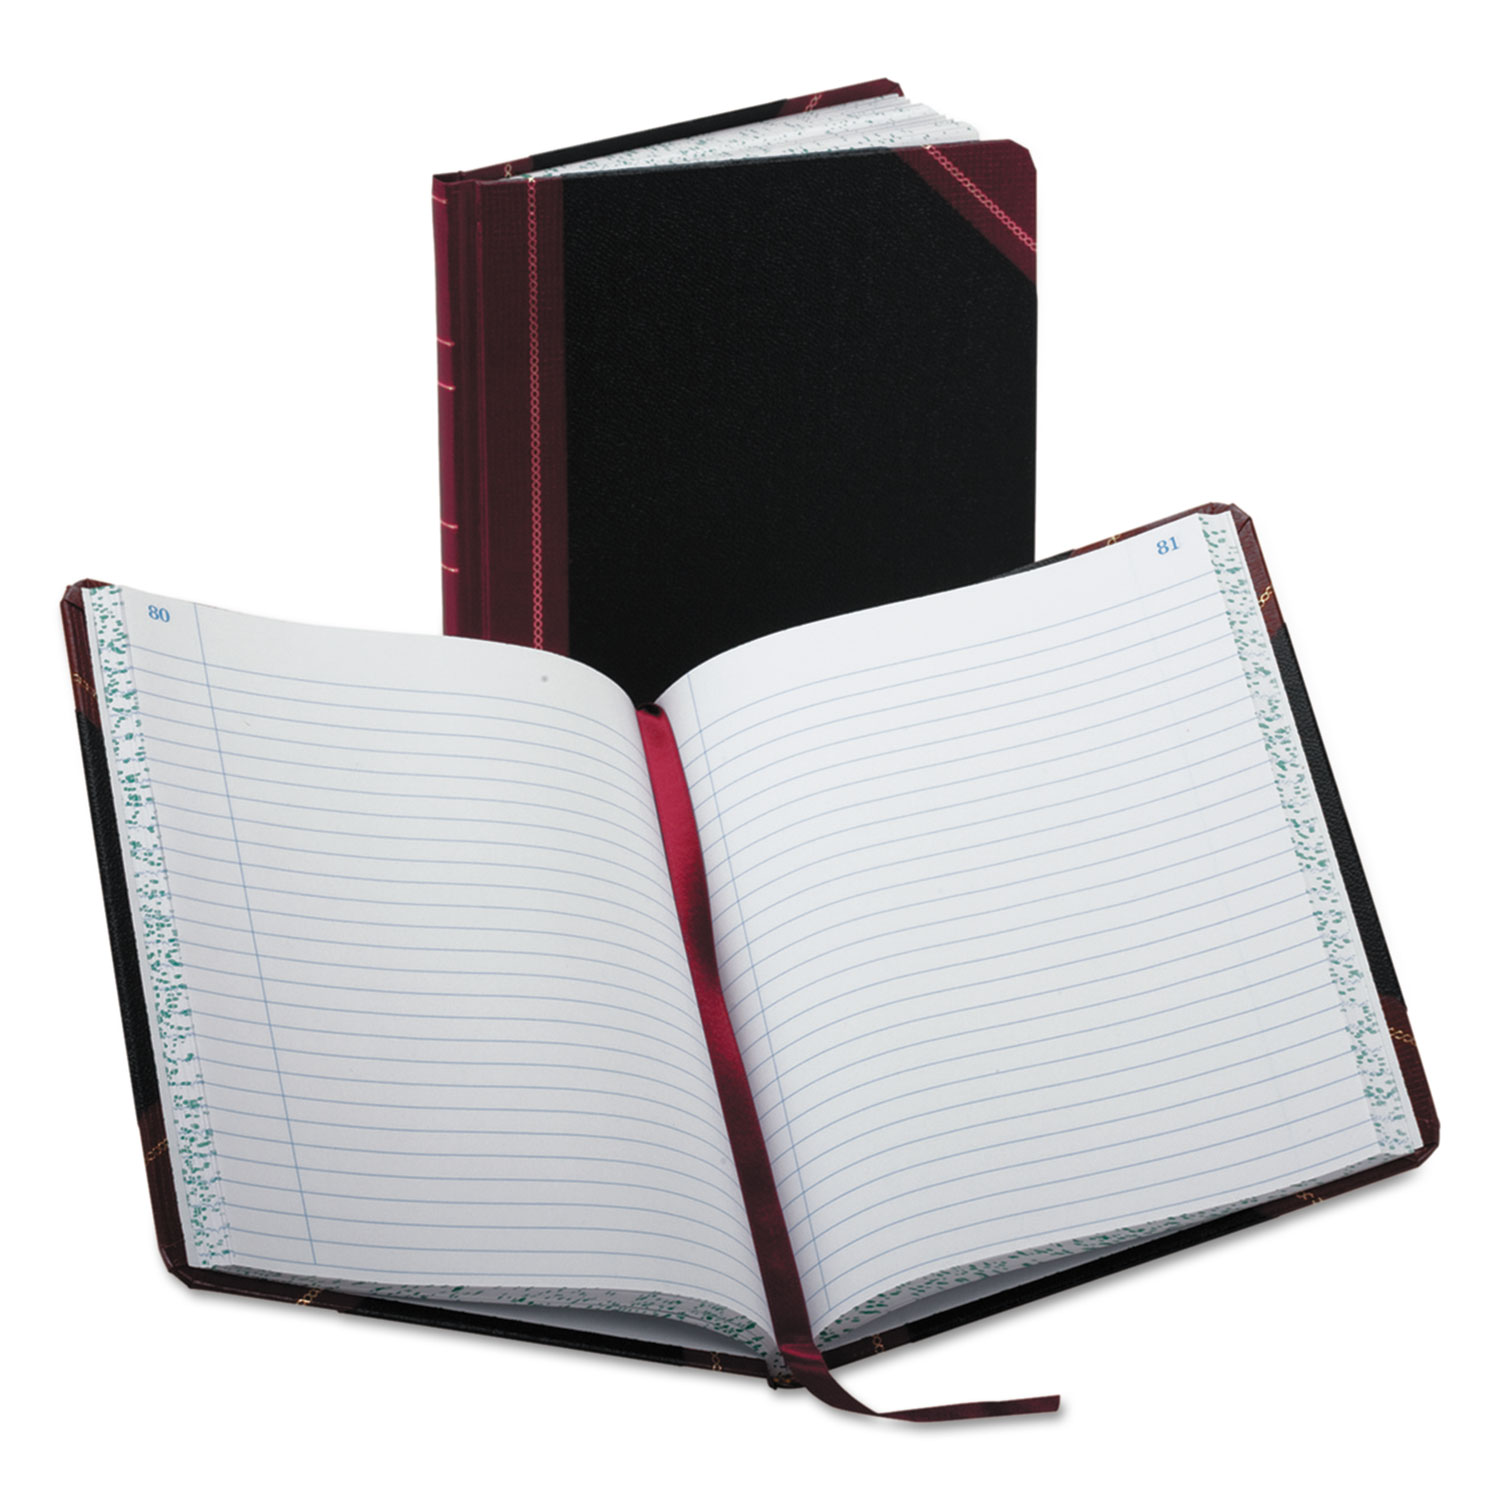 Record/Account Book, Record Rule, Black/Red, 150 Pages, 9 5/8 x 7 5/8